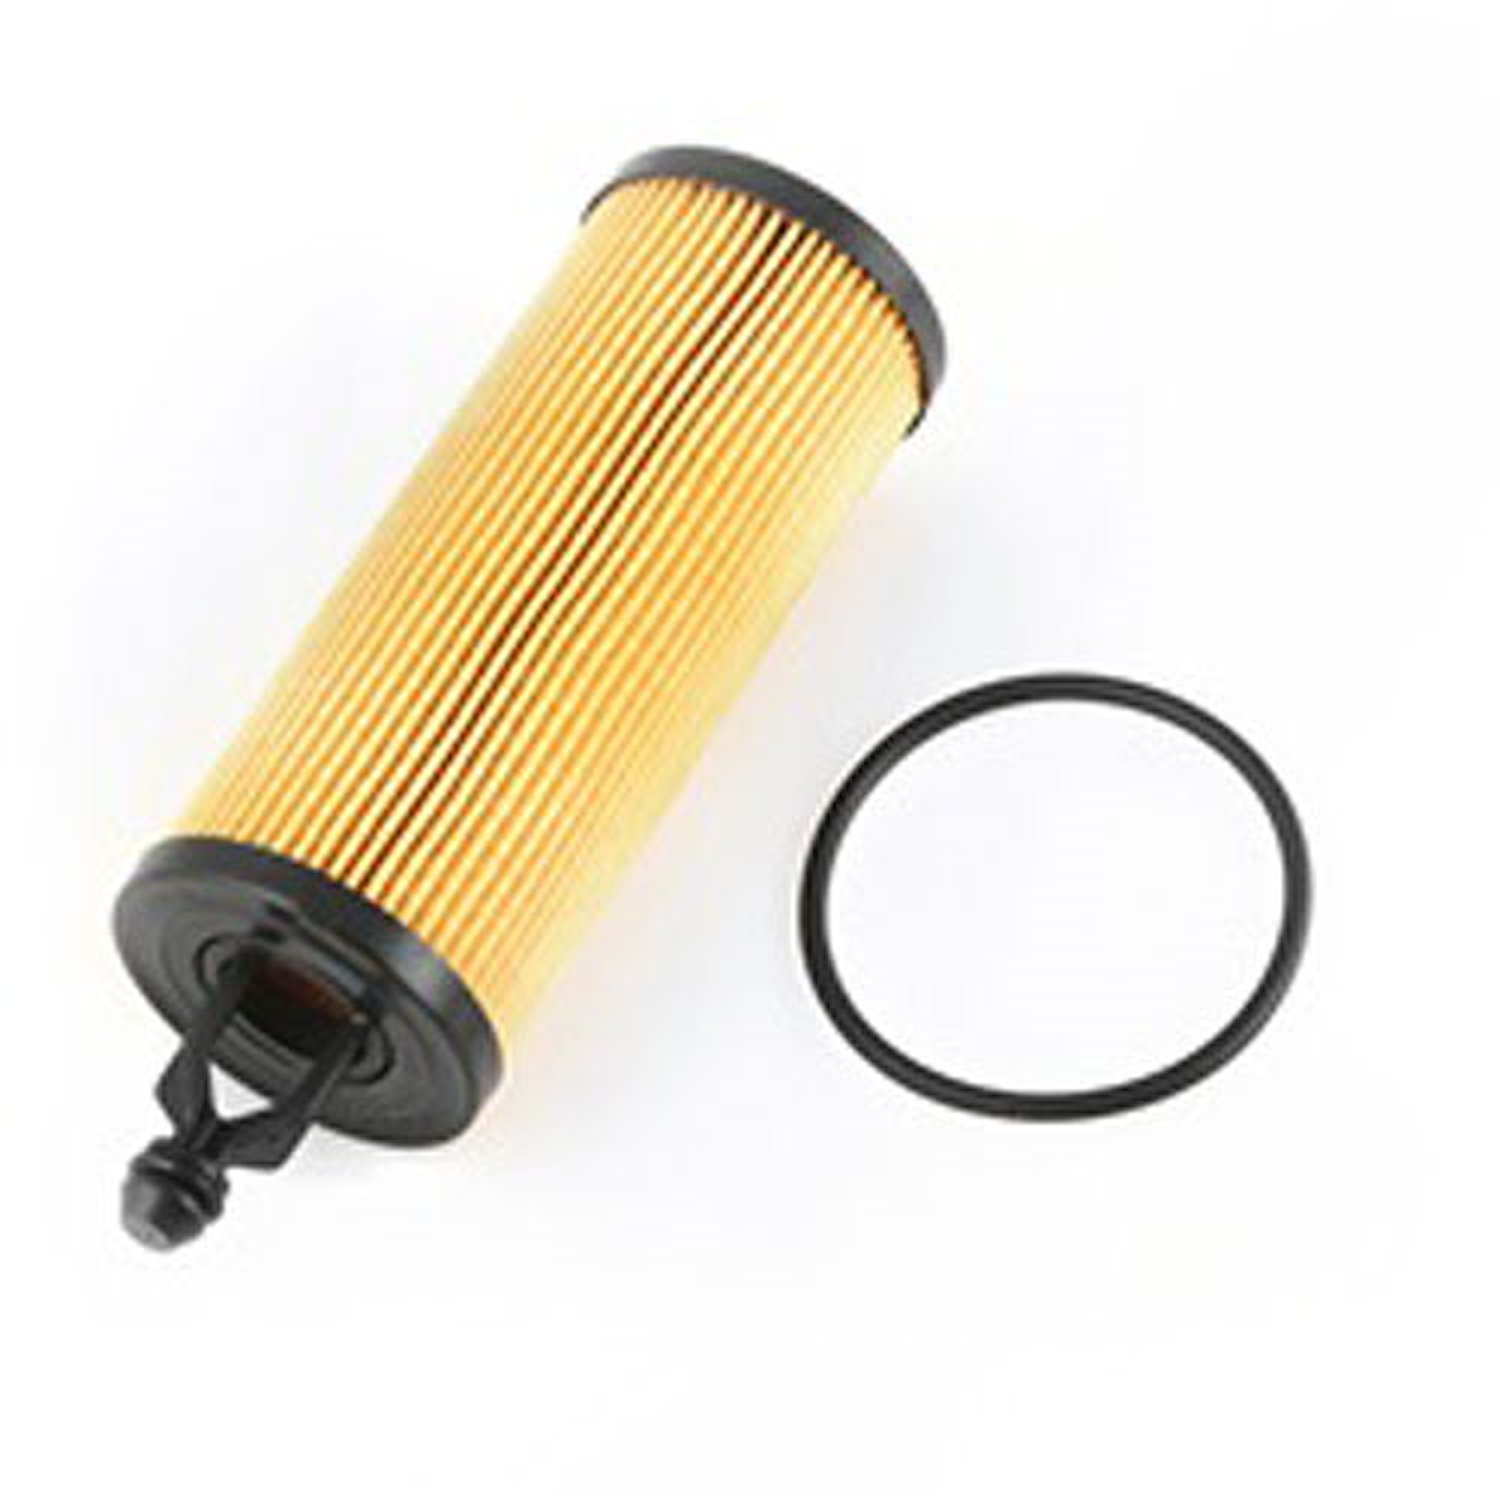 This oil filter from Omix-ADA fits the 3.0L 3.2L and 3.6L engine found in 14-16 Jeep Cherokee 14-16